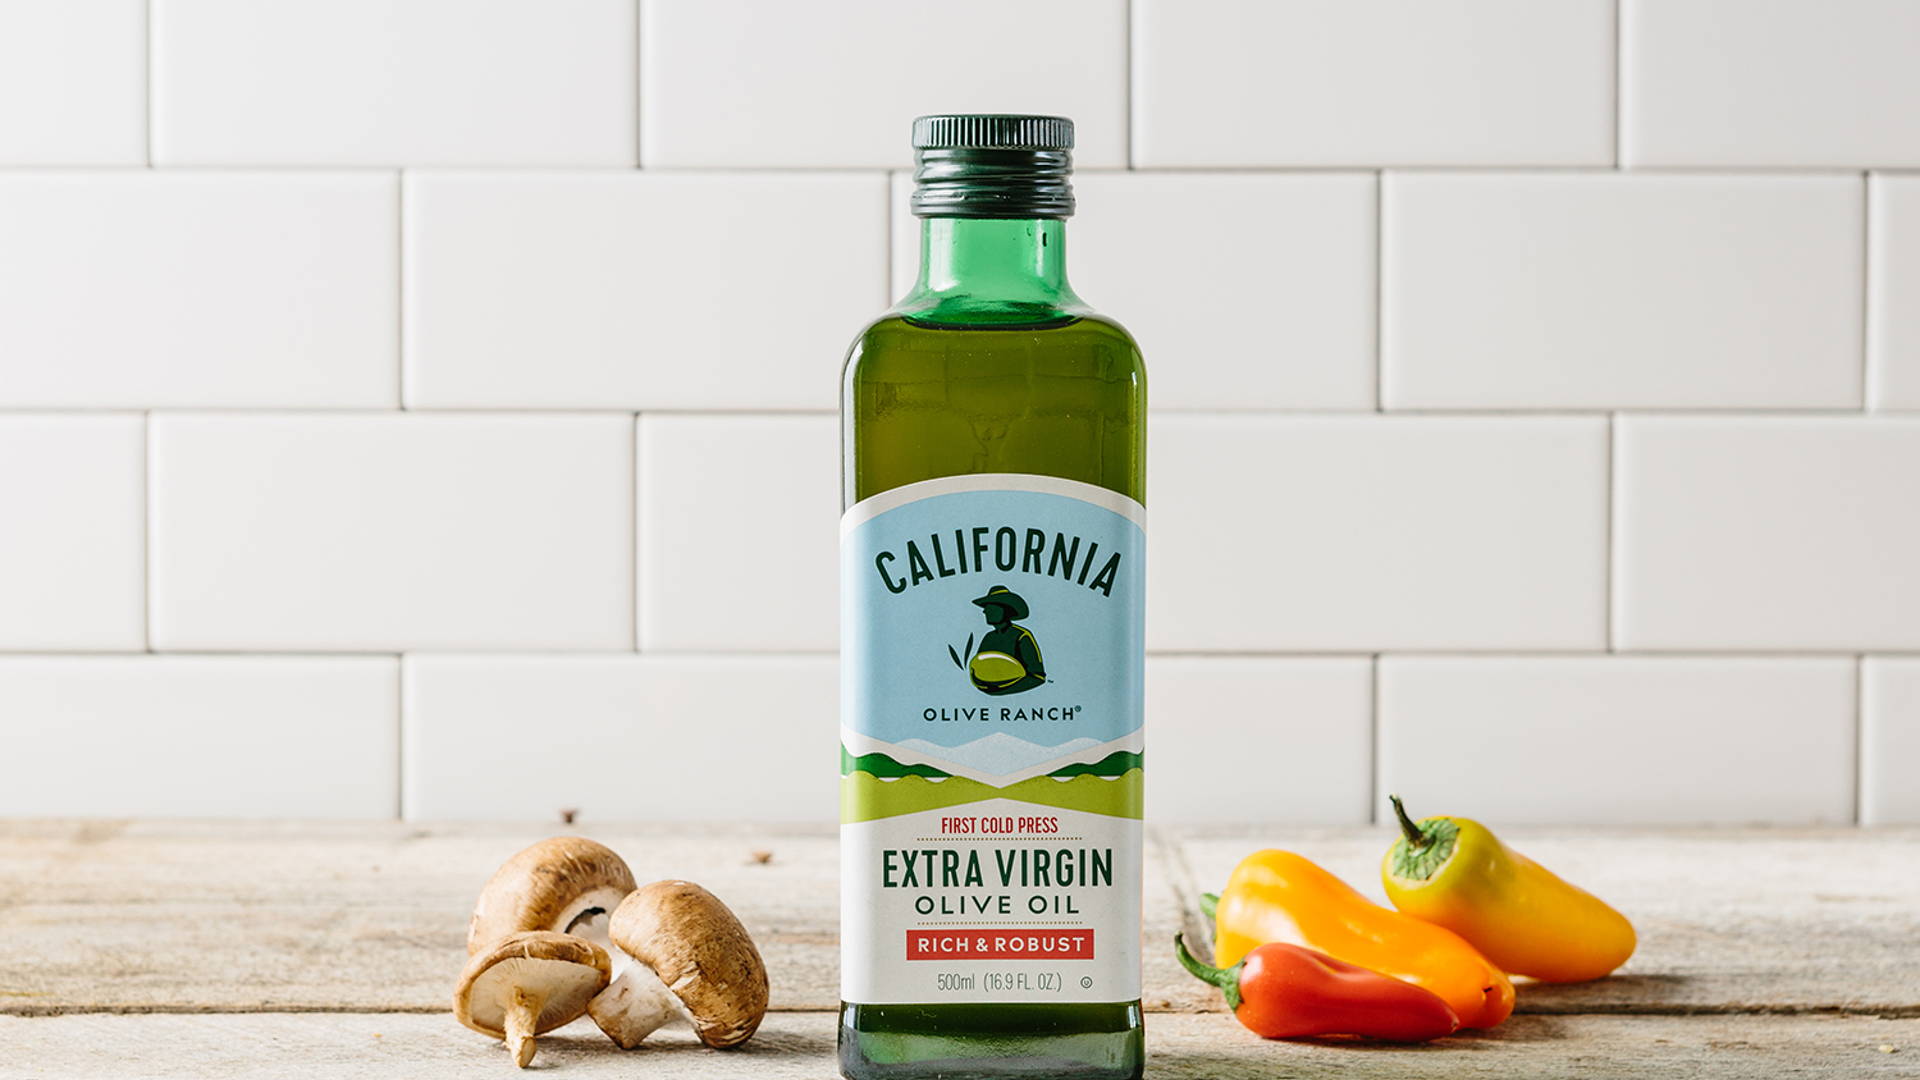 Featured image for A Modern Design for California Olive Oil Puts the “Grow” in Homegrown